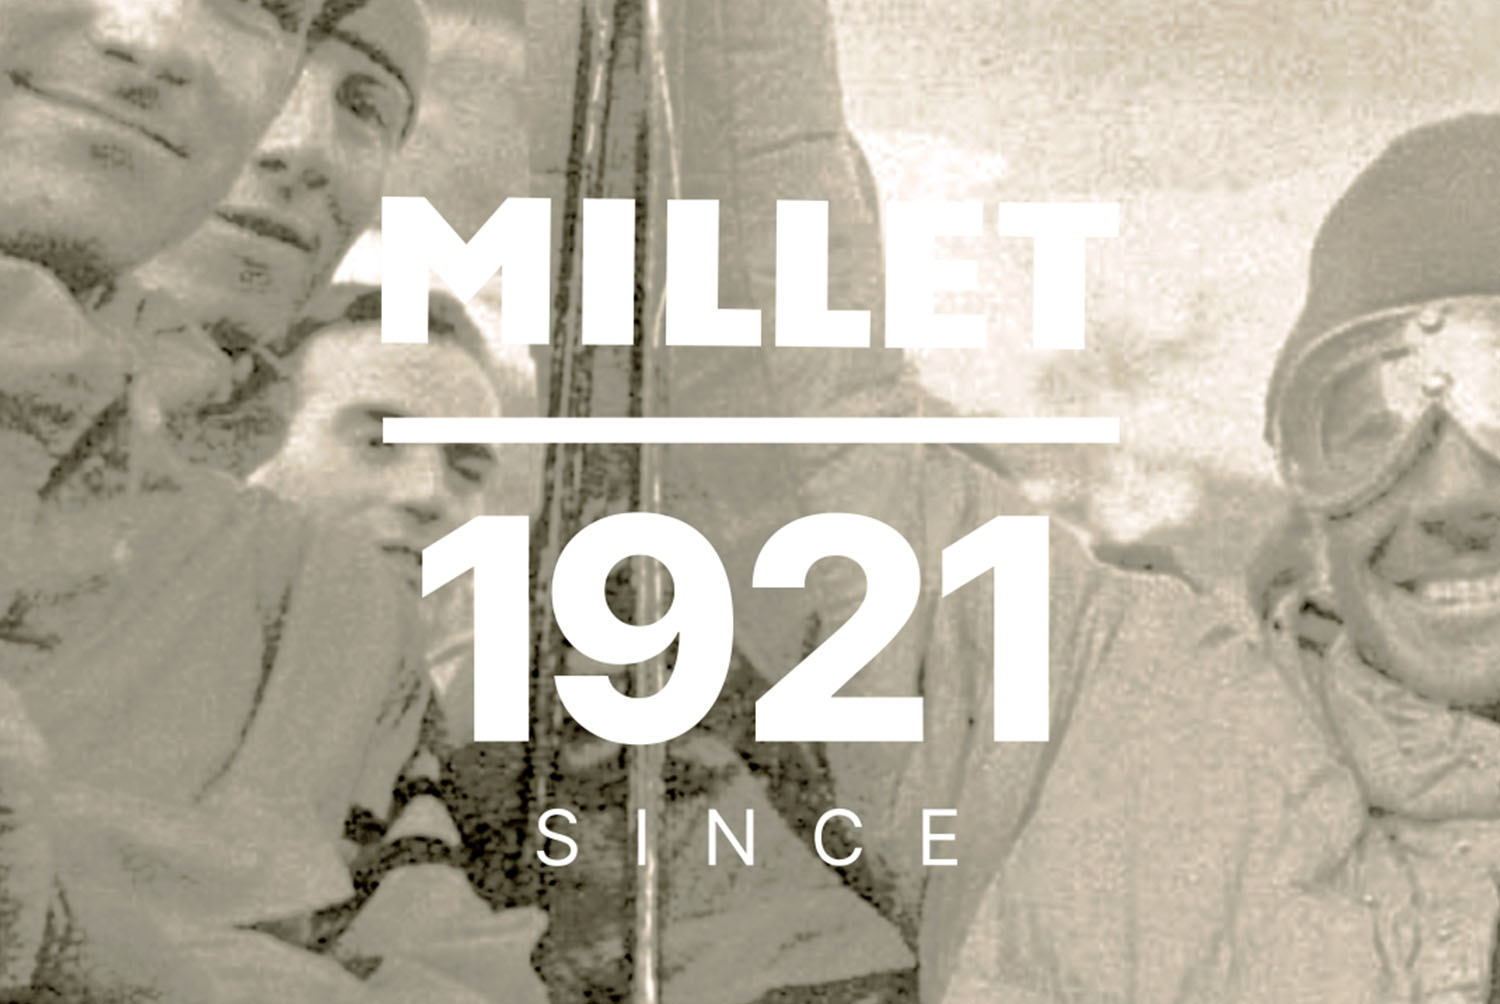 HISTORY OF MILLET